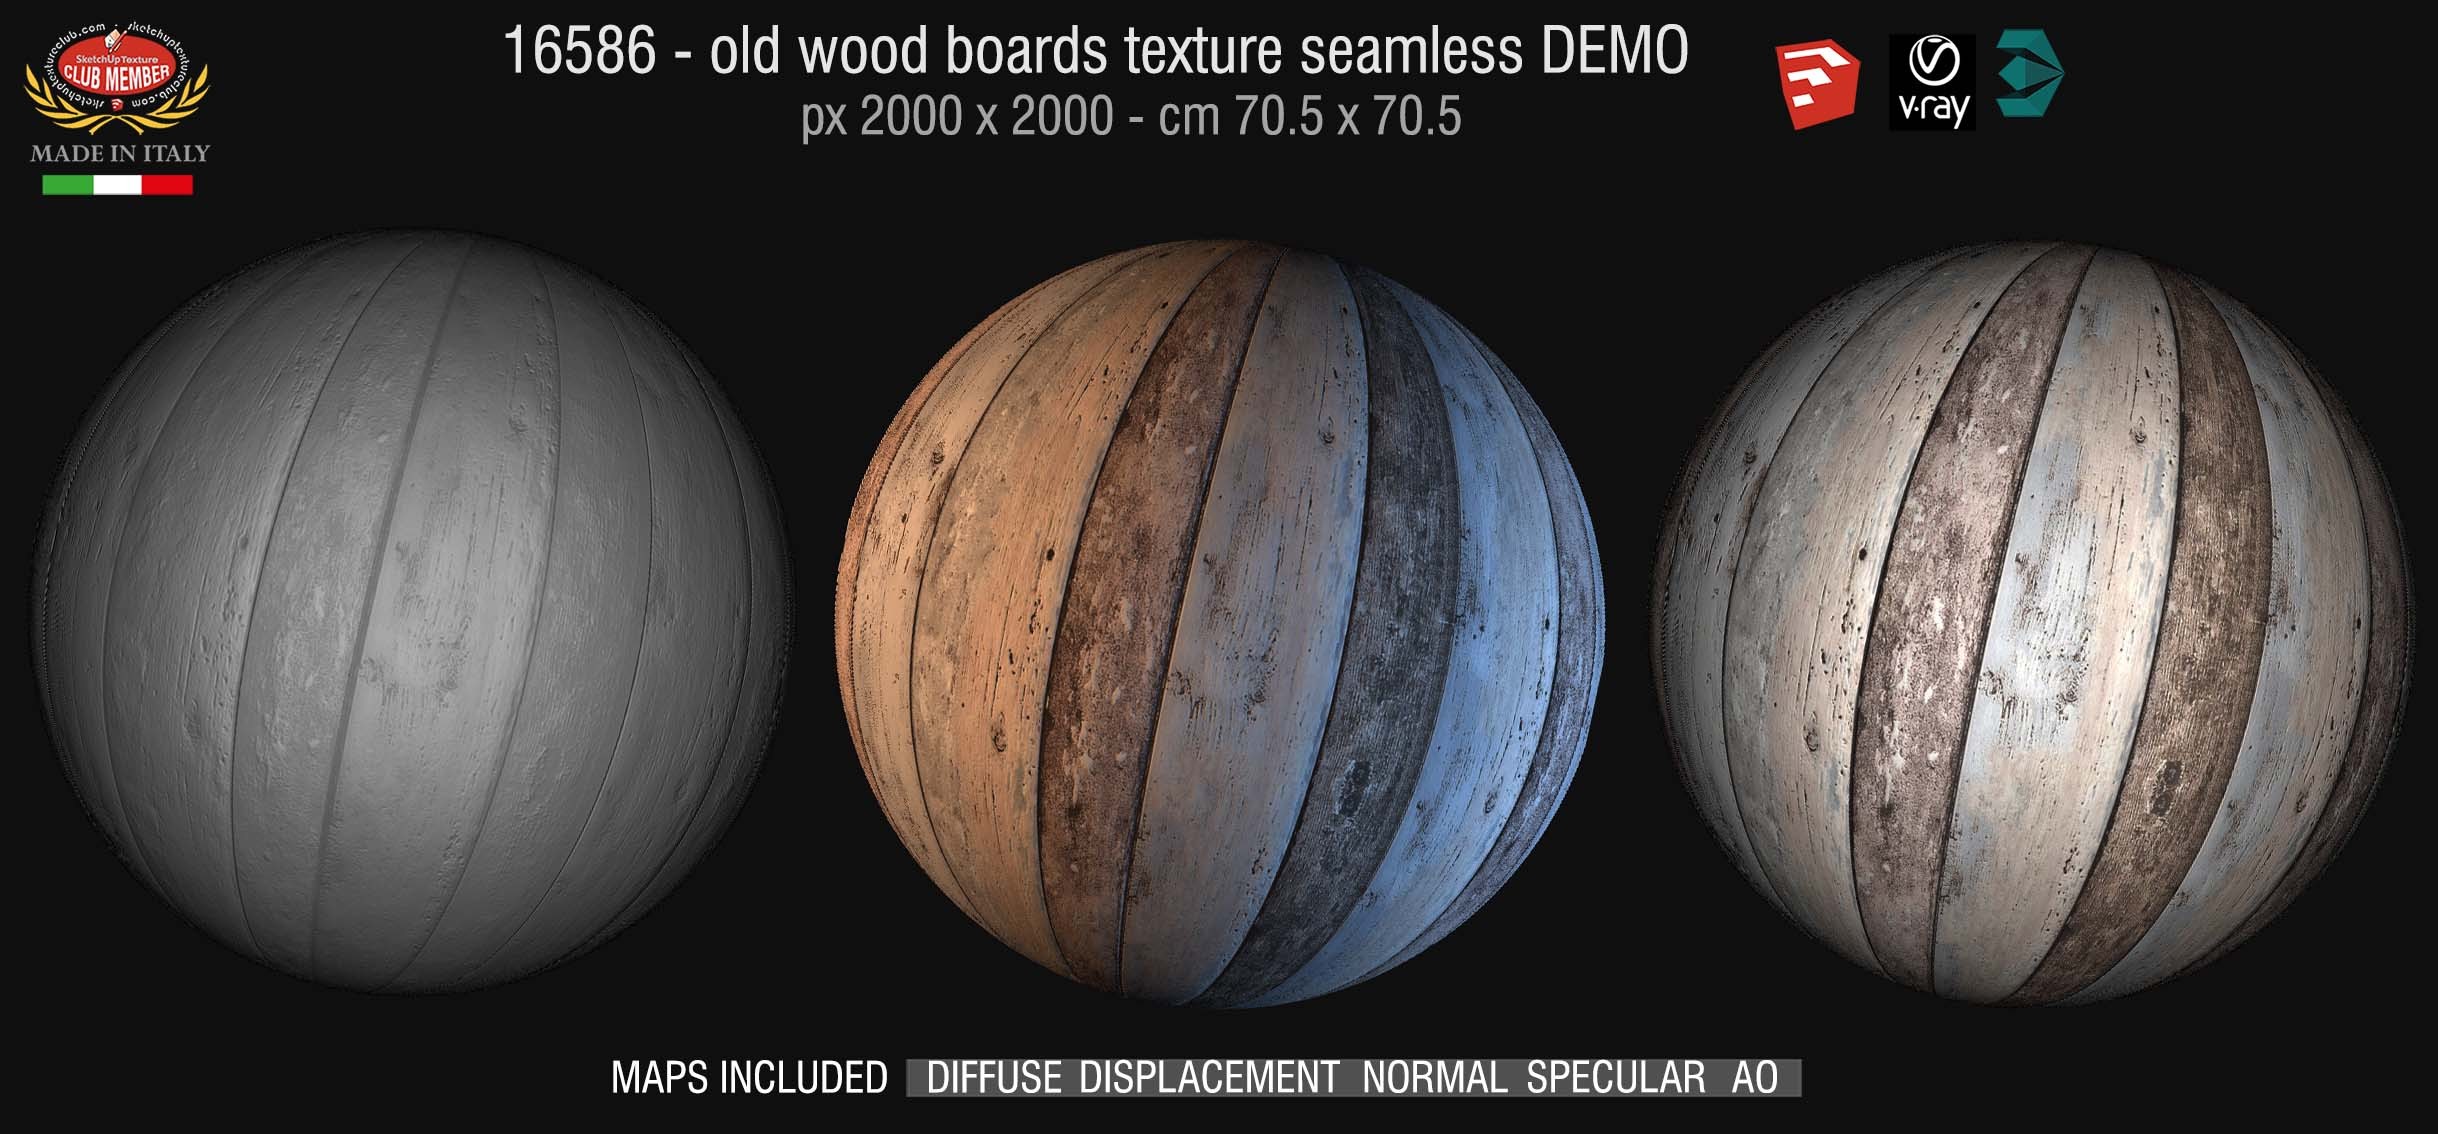 16586 HR Old wood boards texture seamless + maps demo